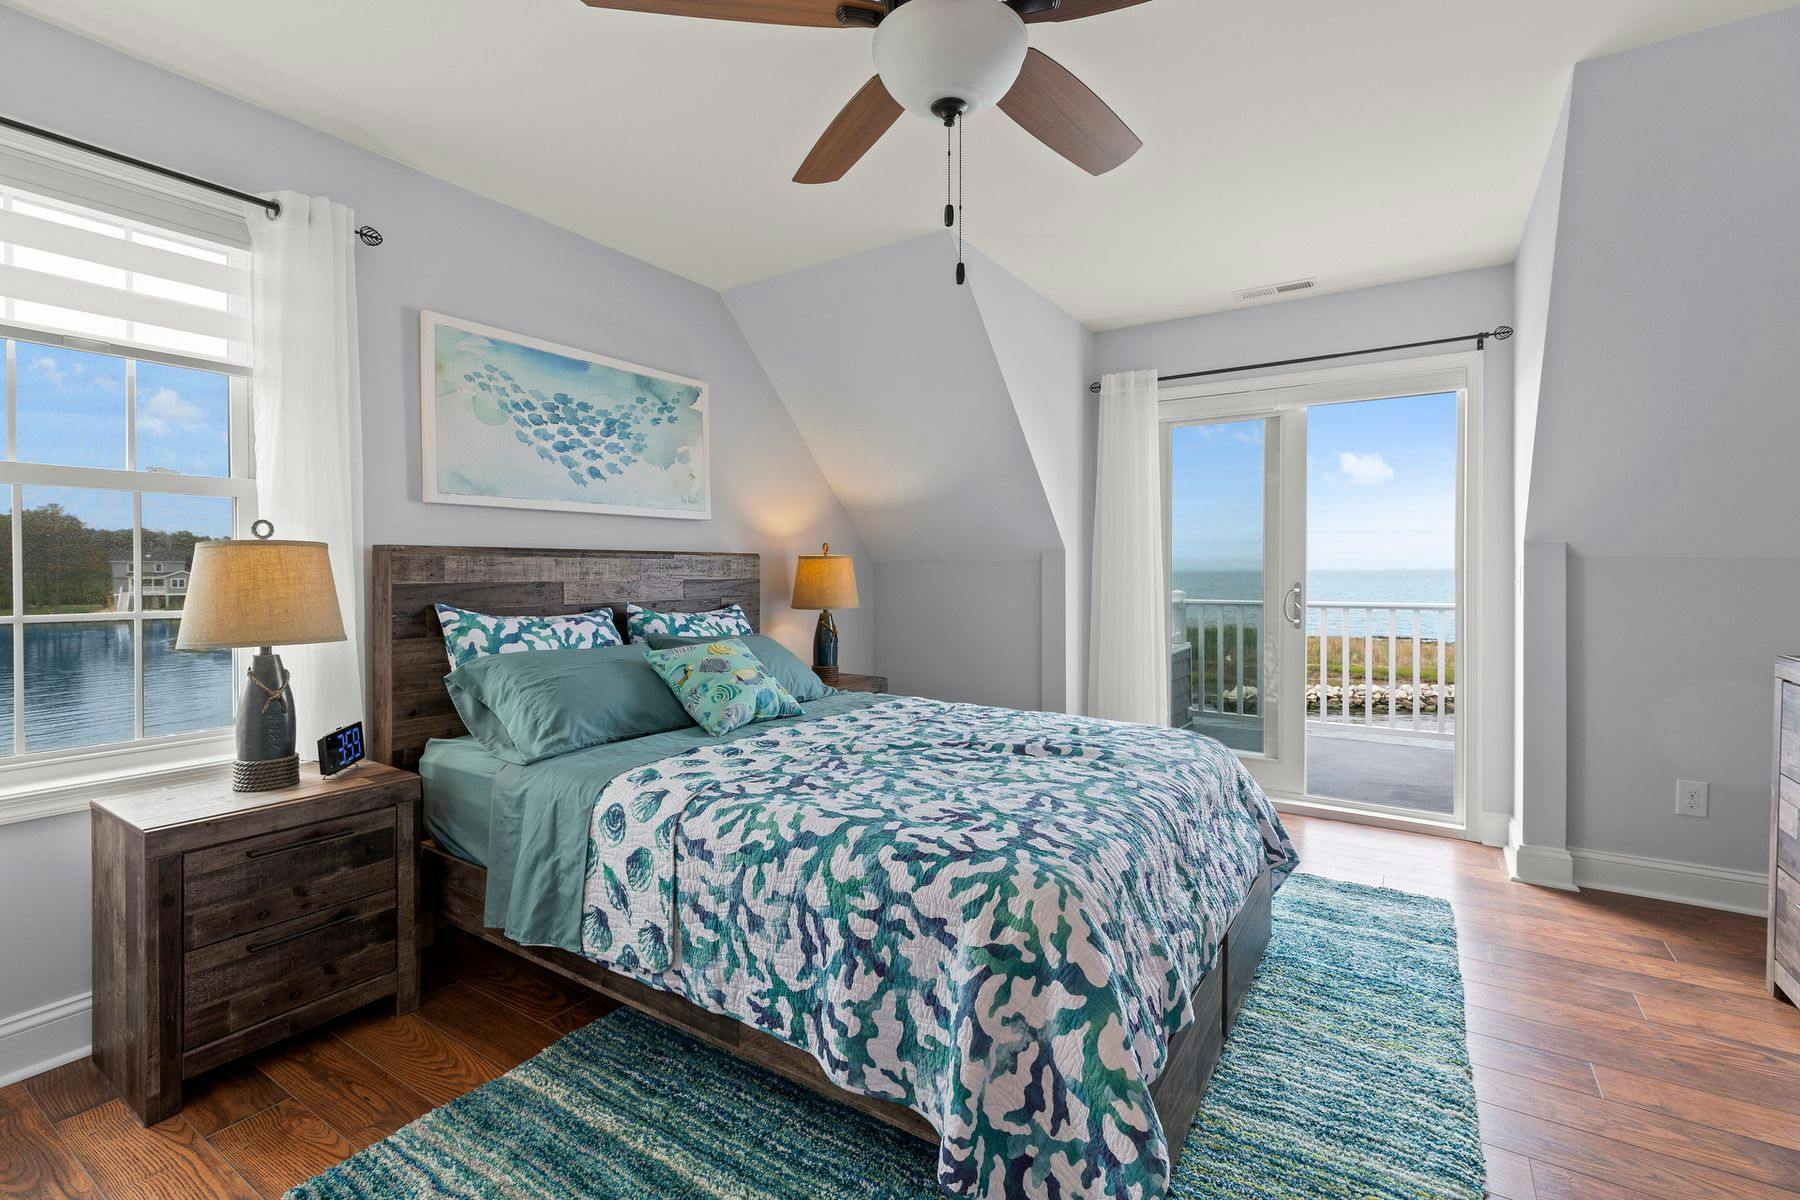 Coastal bedroom with views in Chincoteague